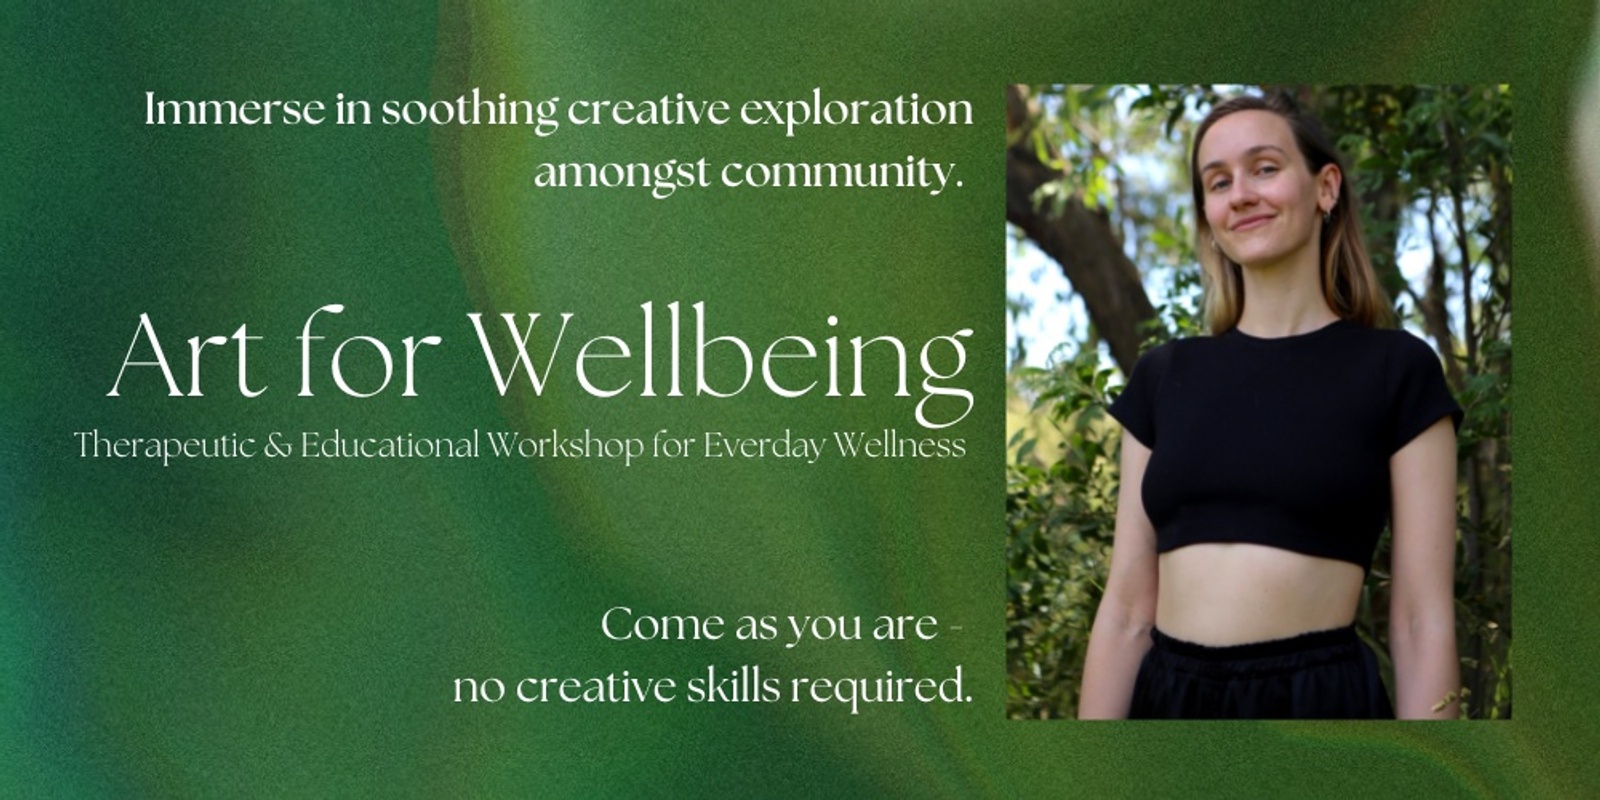 Art for Wellbeing - Therapeutic & Educational Workshop for Everyday Wellness - All Skill Levels